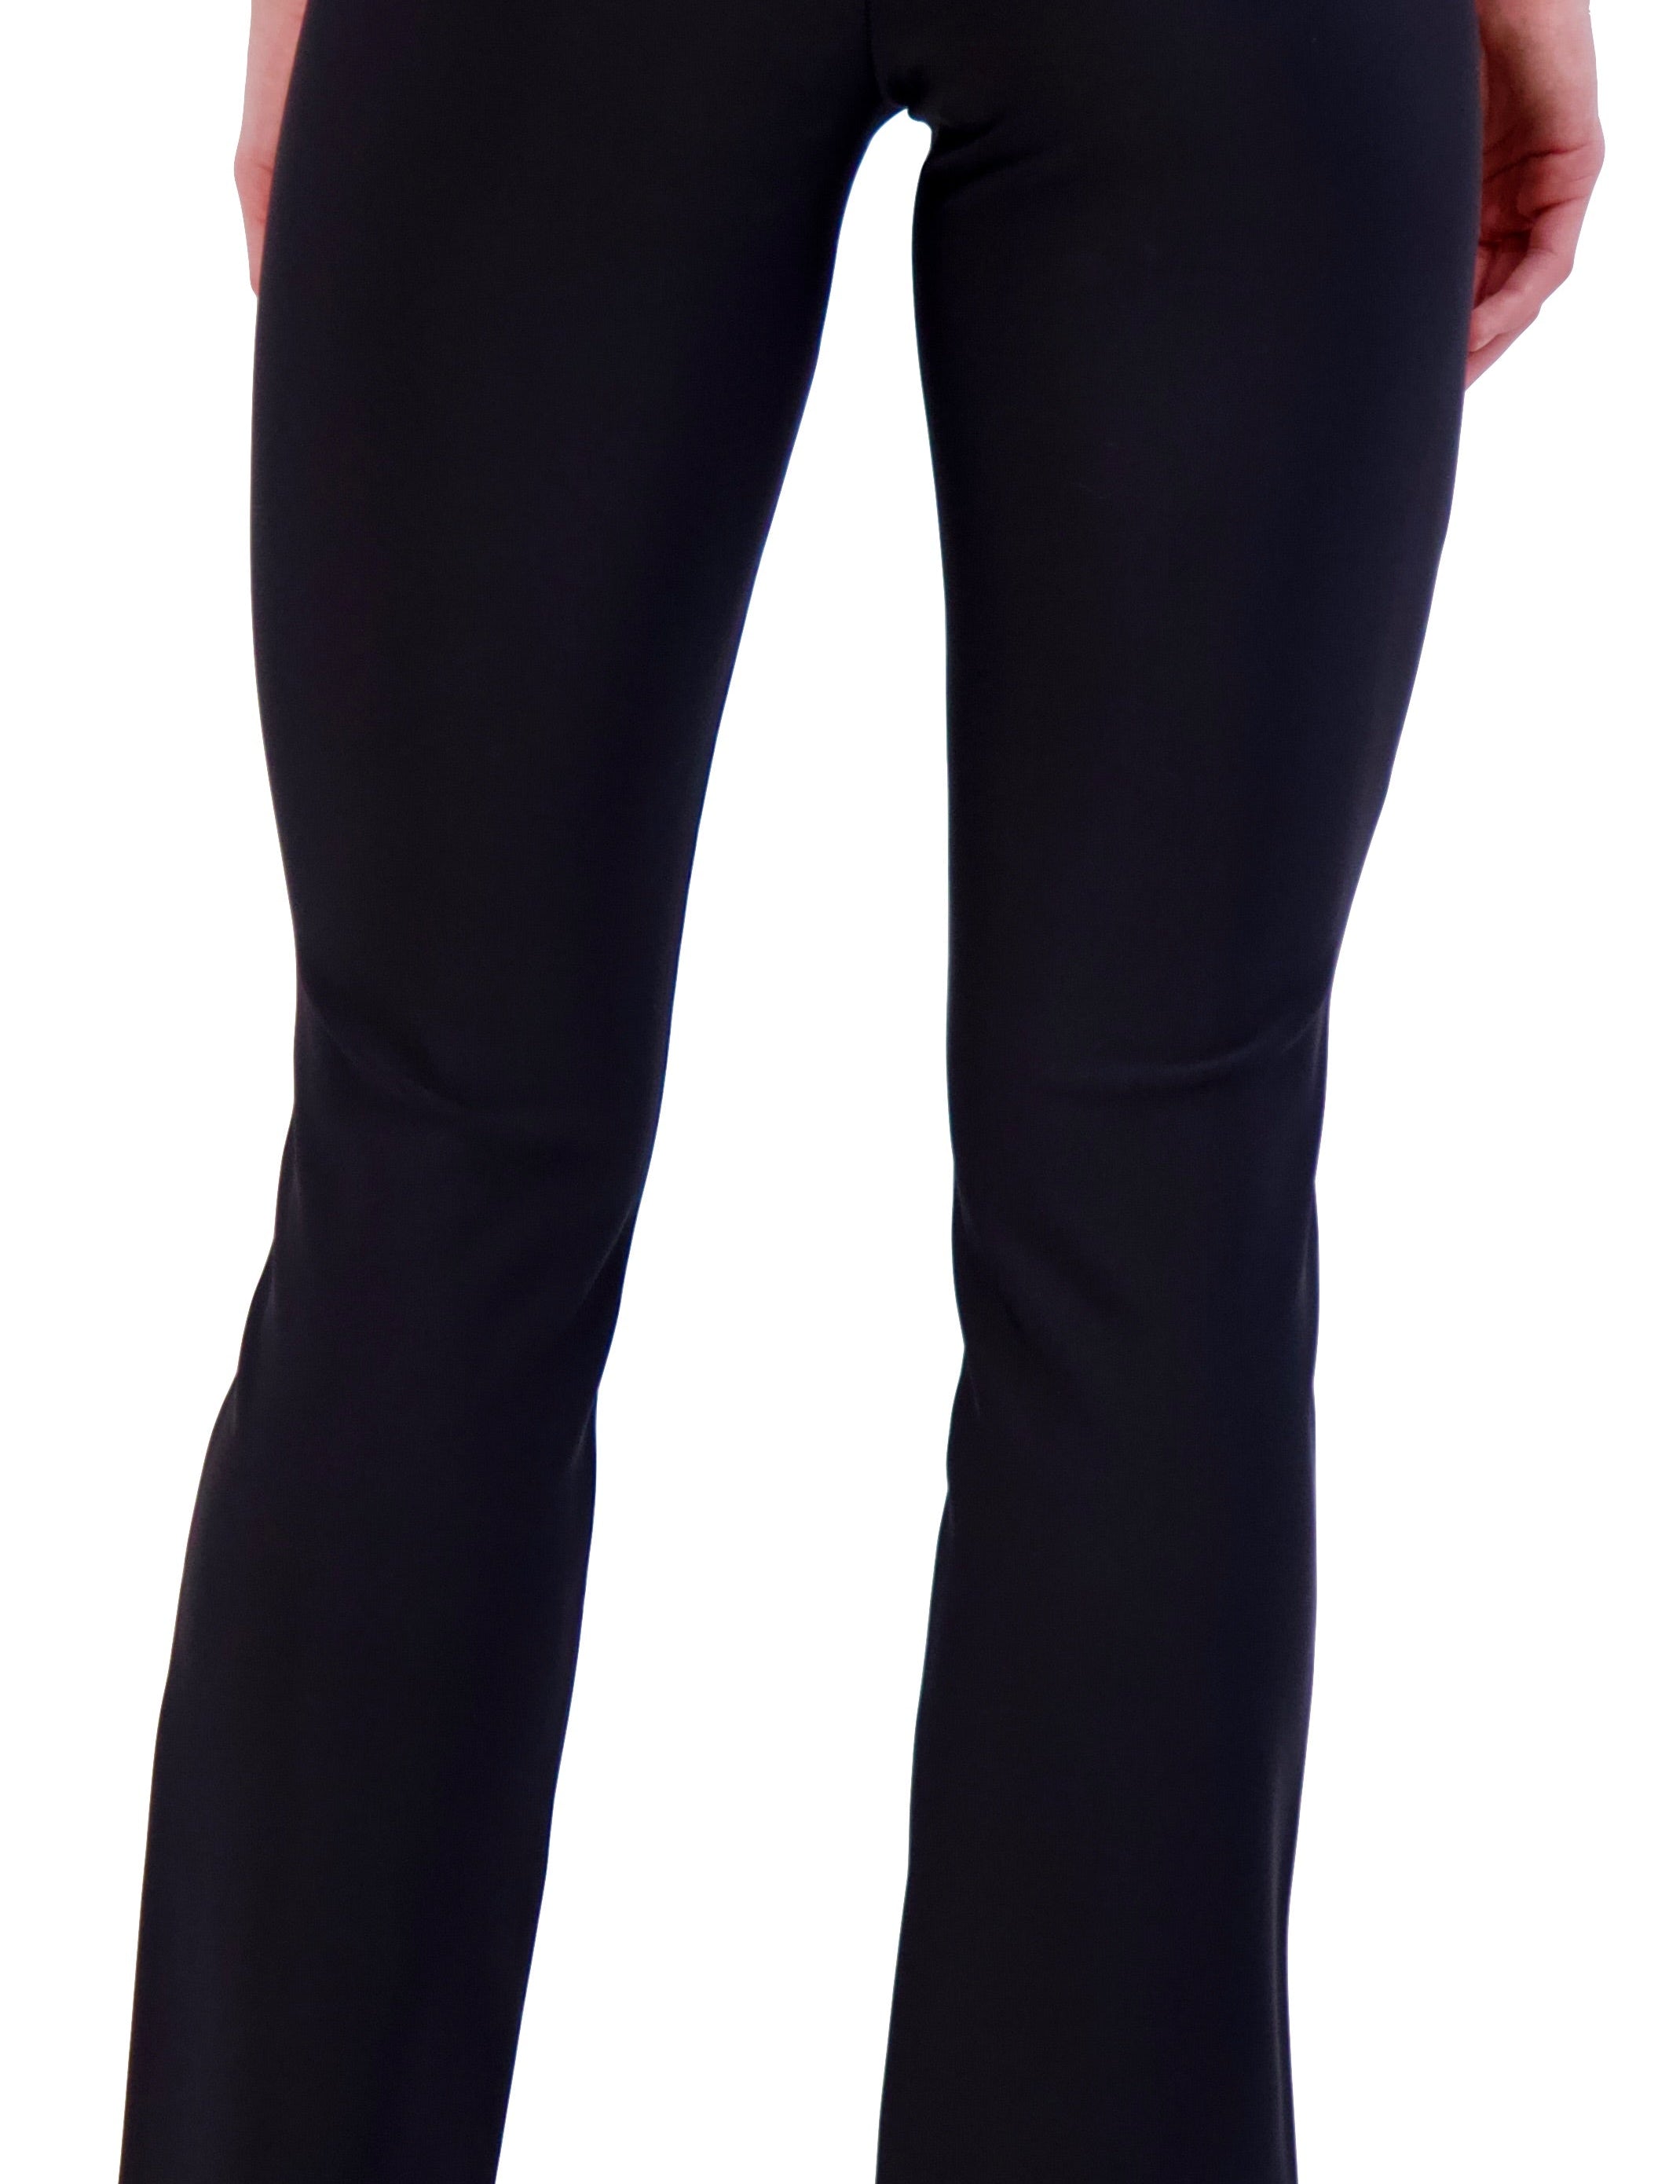 OL922001PP - Scuba Knit High Waisted Legging with Front Vent Opening - Ookie & Lala